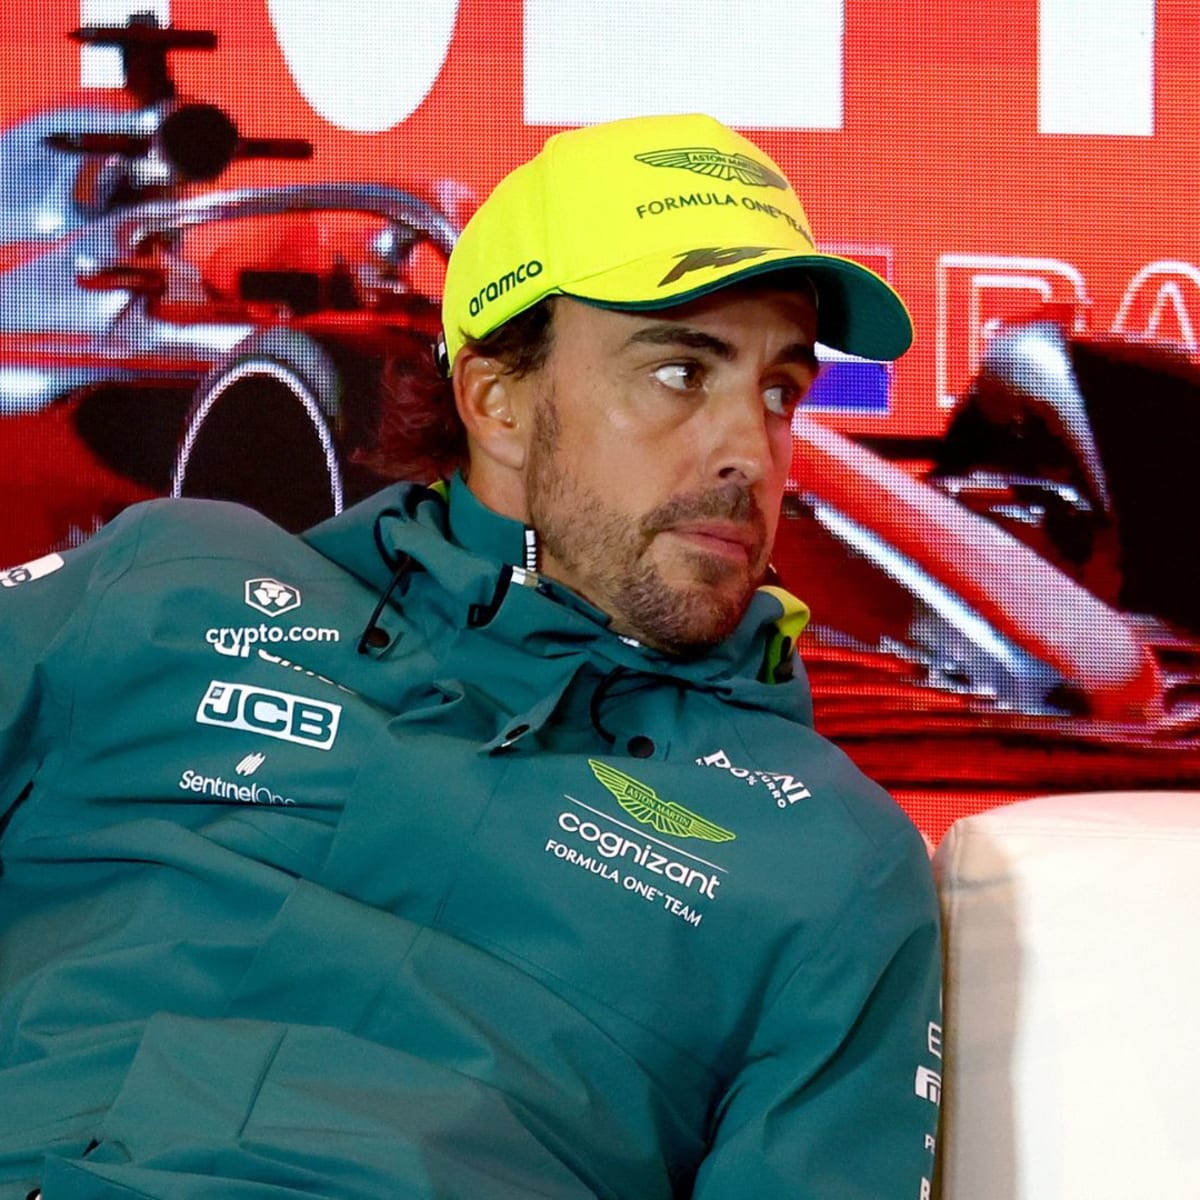 Fernando Alonso relishing 'new beginning' in F1 after Renault testing, Formula One